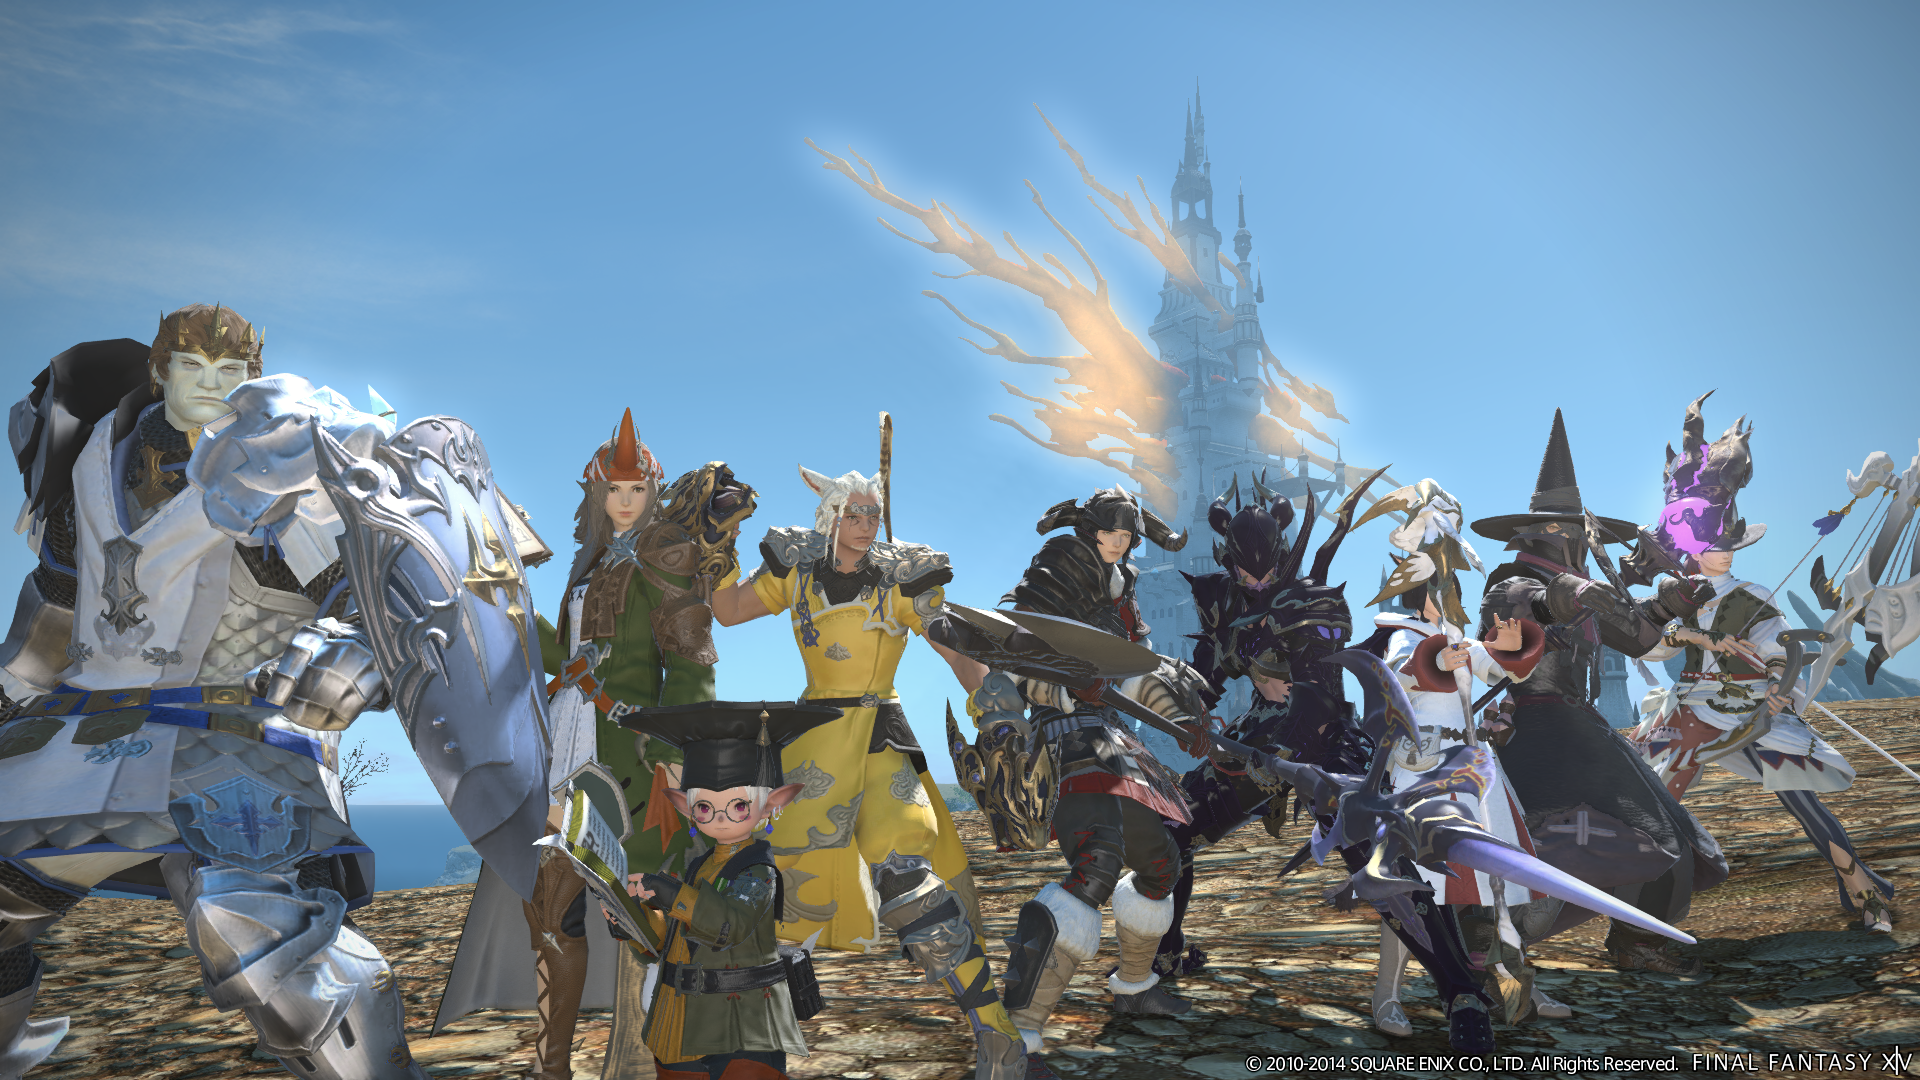 The Beginner’s Guide To Getting Into ‘Final Fantasy XIV’